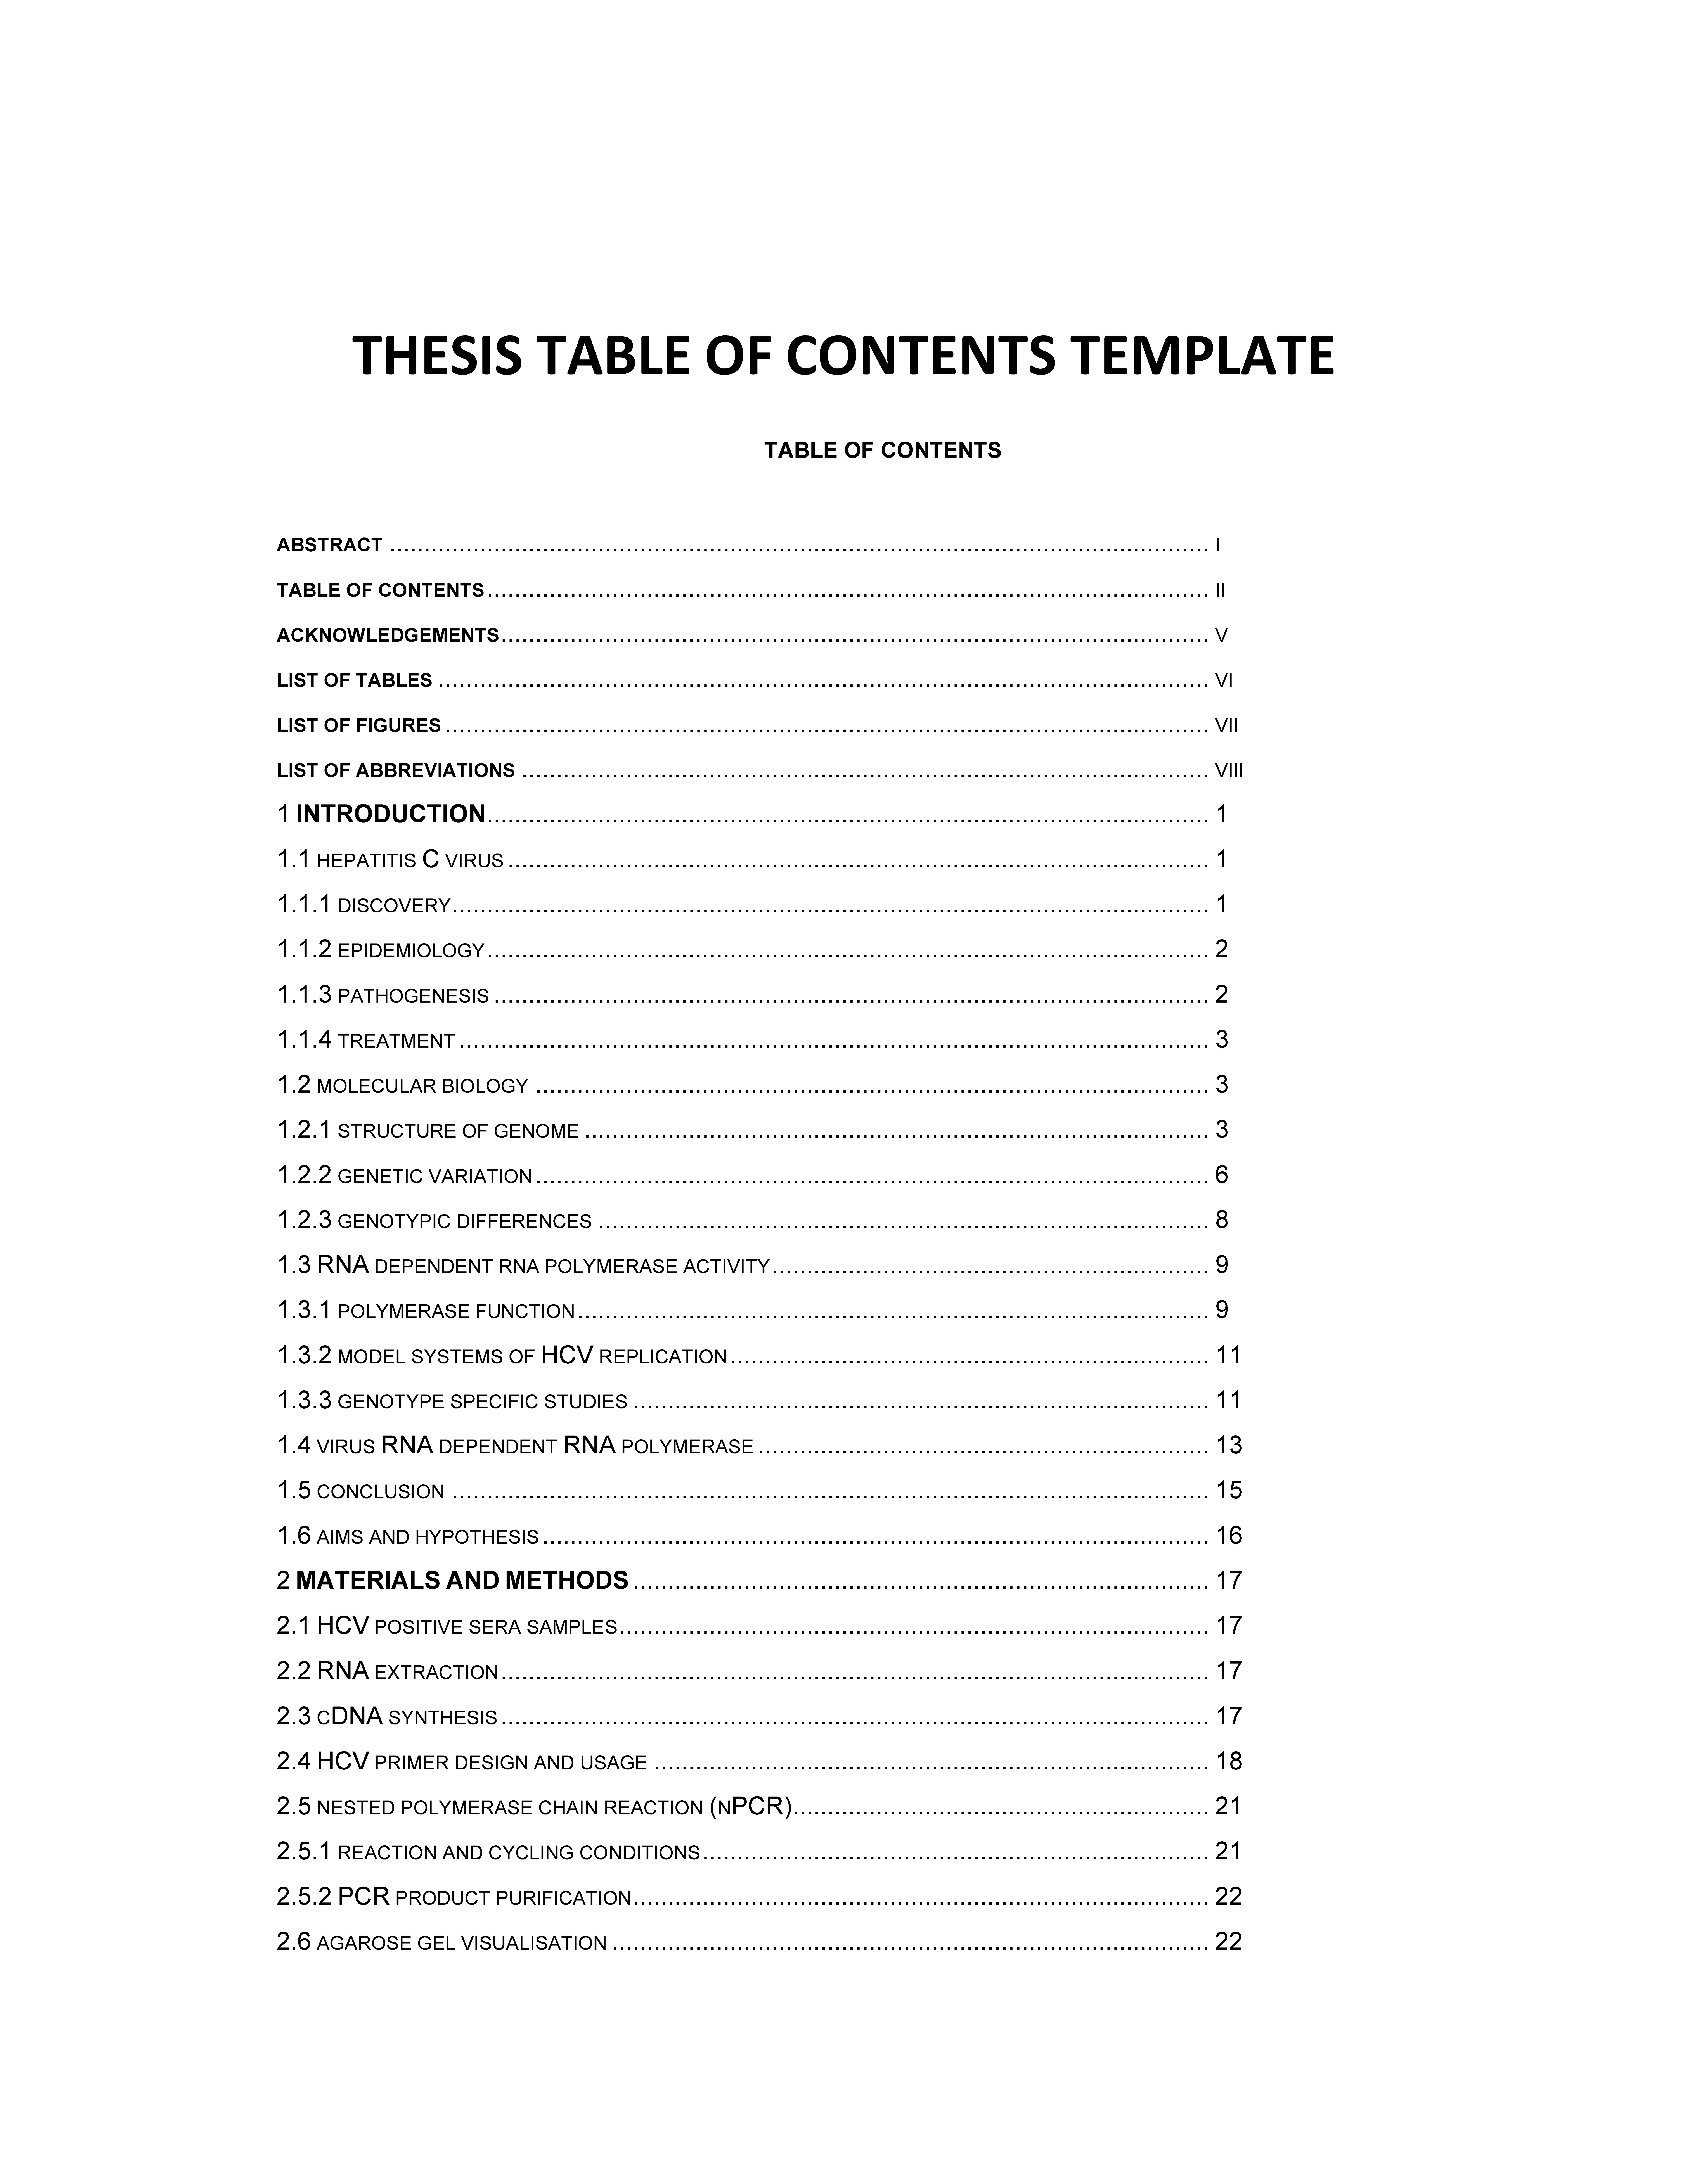 Thesis Table of Contents template main image